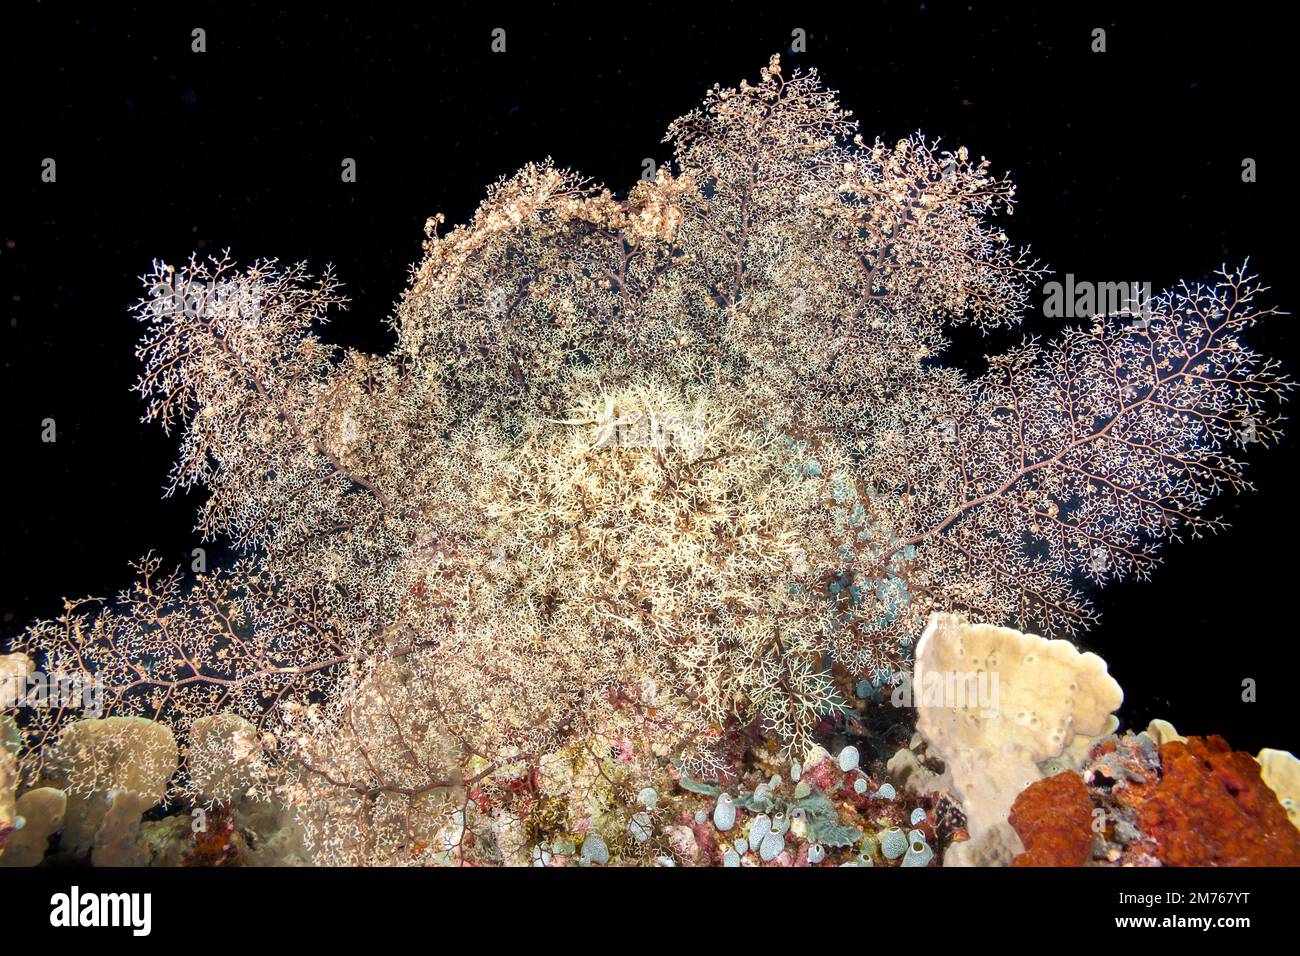 The branching arms of this basket Star, Astroboa nuda, are capturing passing plankton from the waters around Tubbatah Reef, Philippines. During the da Stock Photo